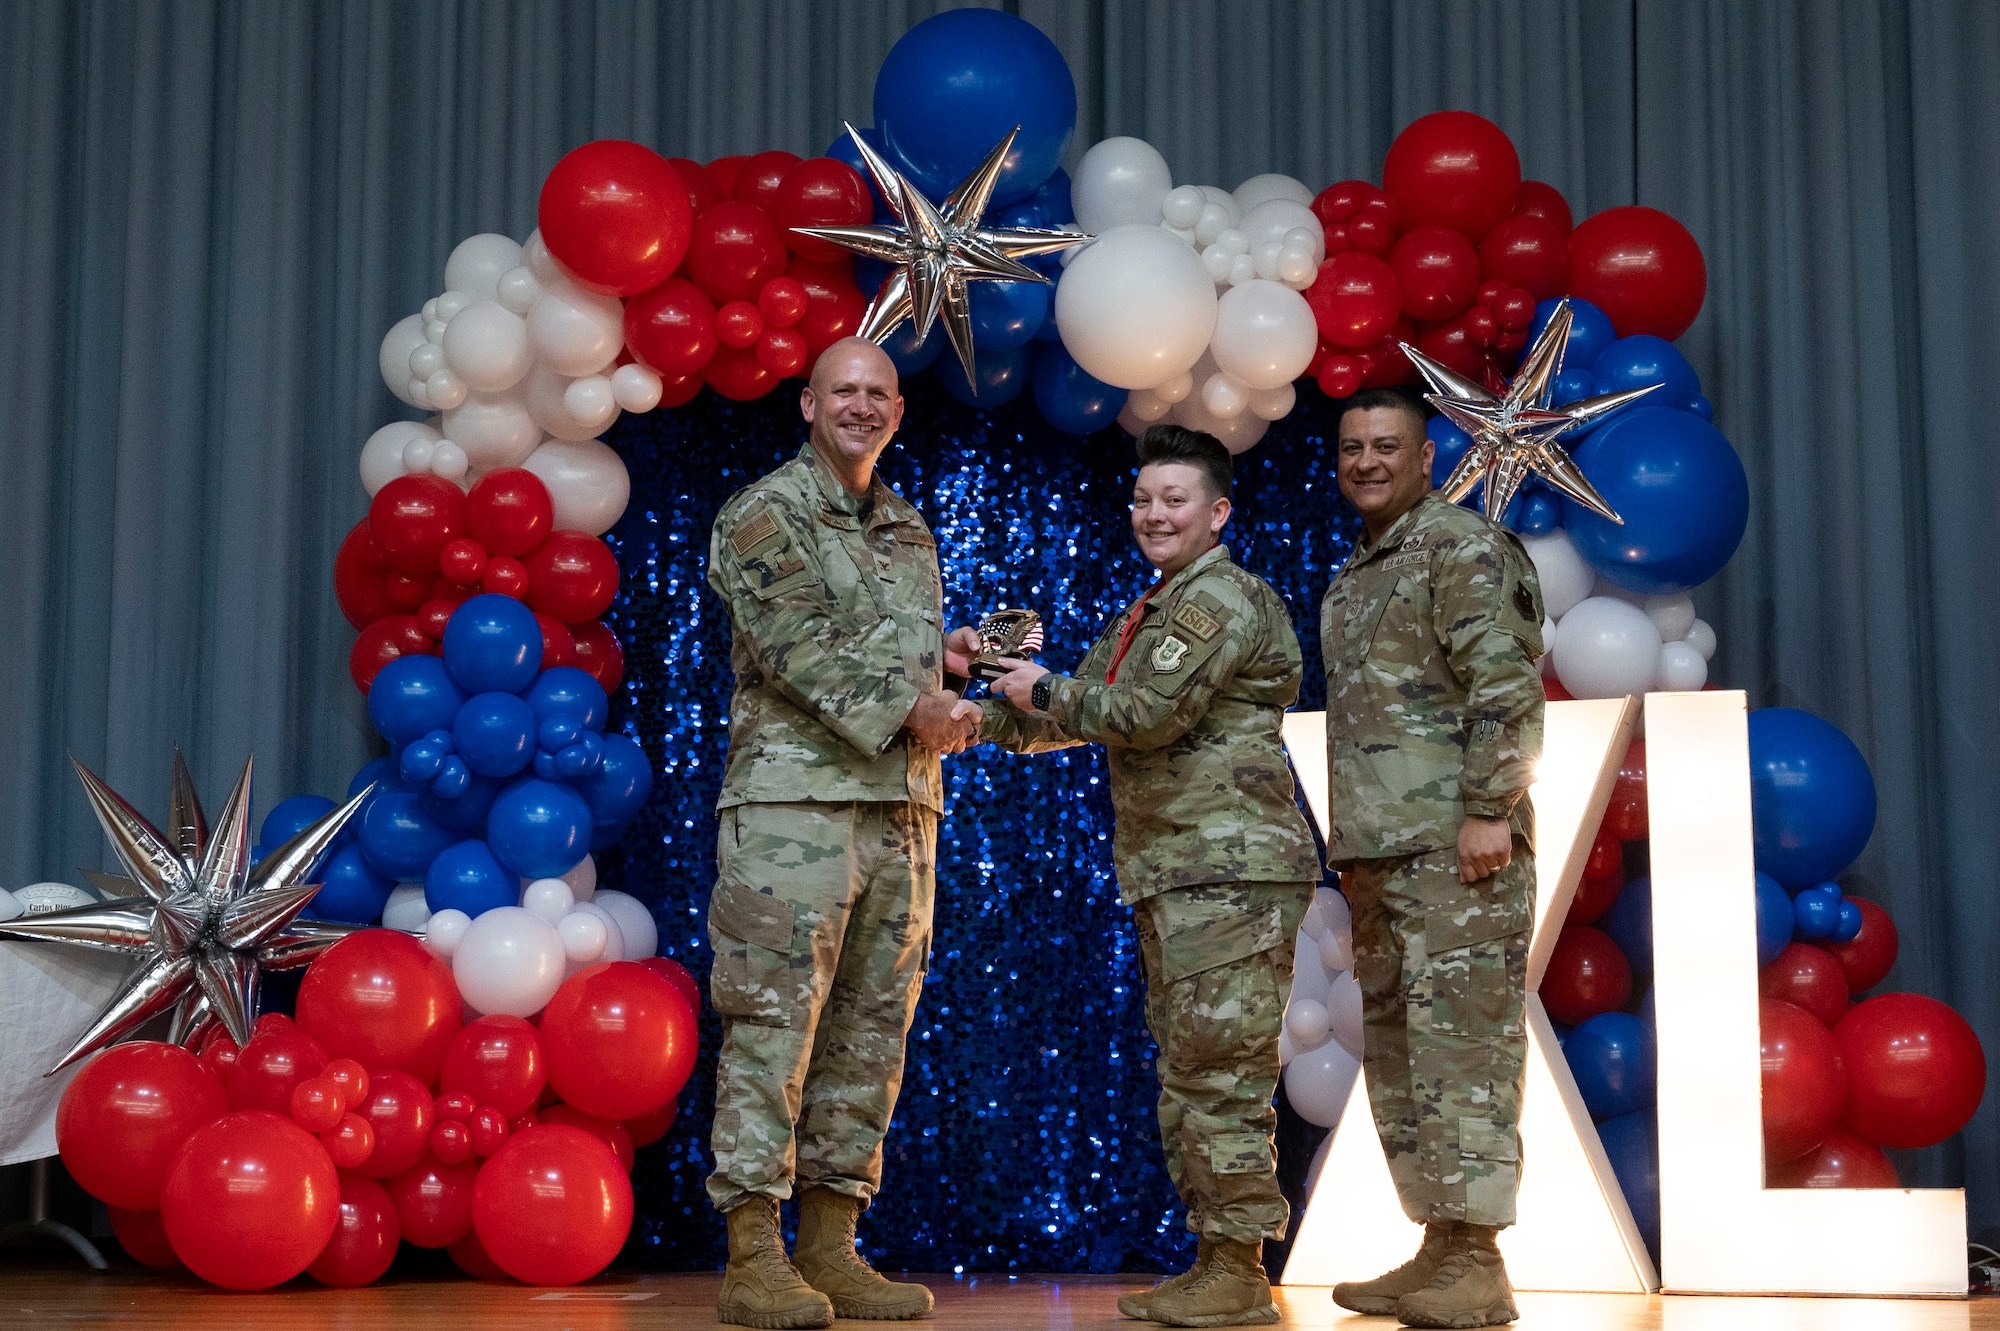 U.S. Air Force Col. Kevin Davidson, 47th Flying Training Wing (FTW) commander, and Chief Master Sgt. Lester Largaespada, 47th FTW command chief, present Master Sgt. Chelsea Moschell, 47th Operations Group, an award during the 2023 47th FTW Annual Awards Ceremony at Laughlin Air Force Base, Texas, Feb. 2, 2024. The annual awards recognized the top performers throughout the 47th Flying Training Wing during fiscal year 2023. (U.S. Air Force photo by Senior Airman Kailee Reynolds)